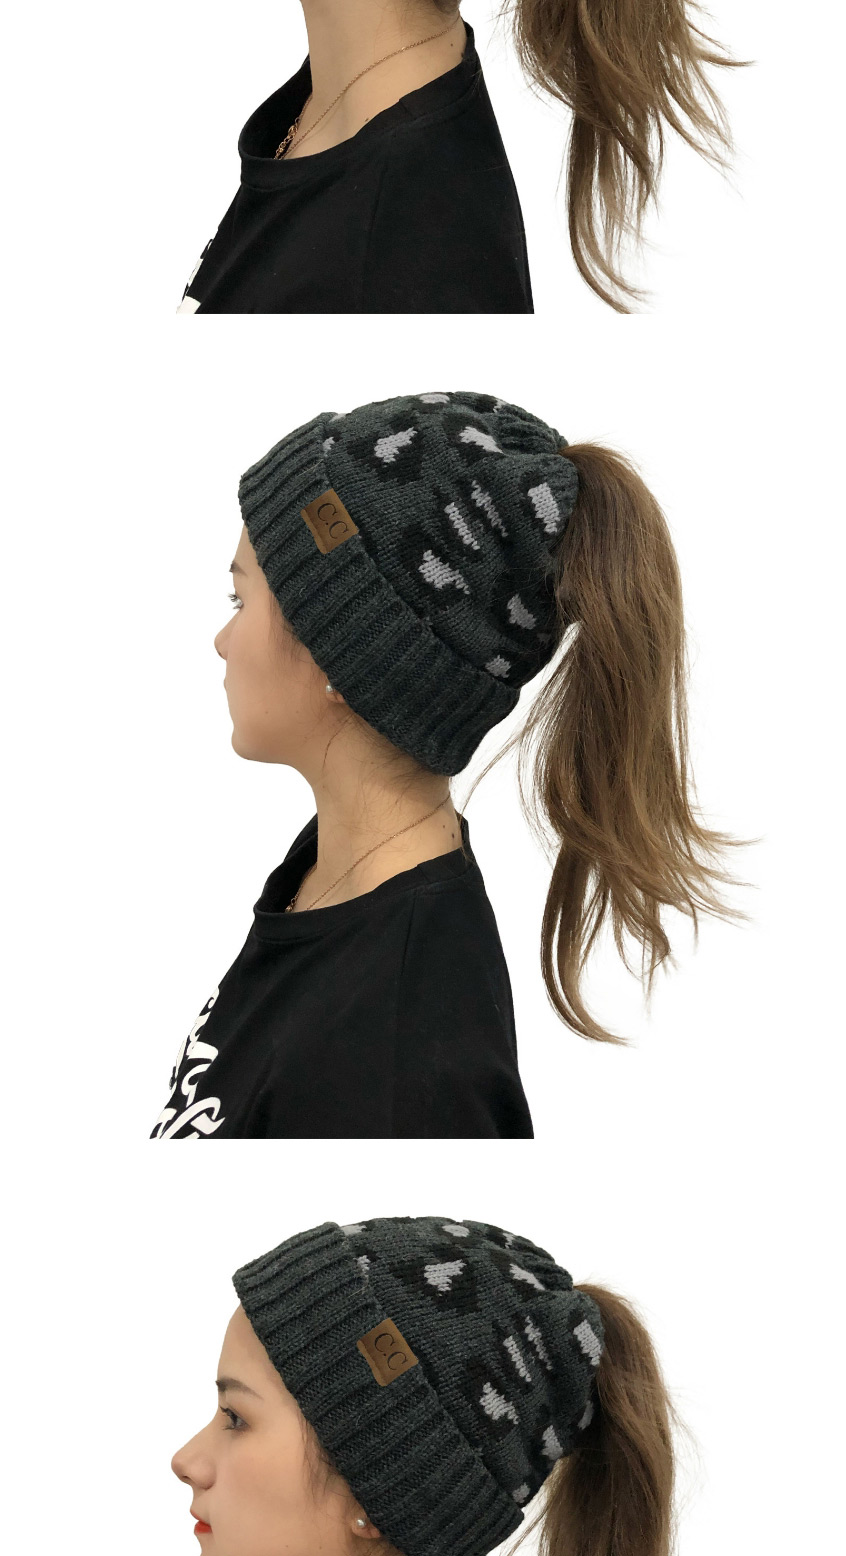 Fashion Dark Gray Leopard Print Ponytail Knitted Beanie With Curled Edges,Knitting Wool Hats